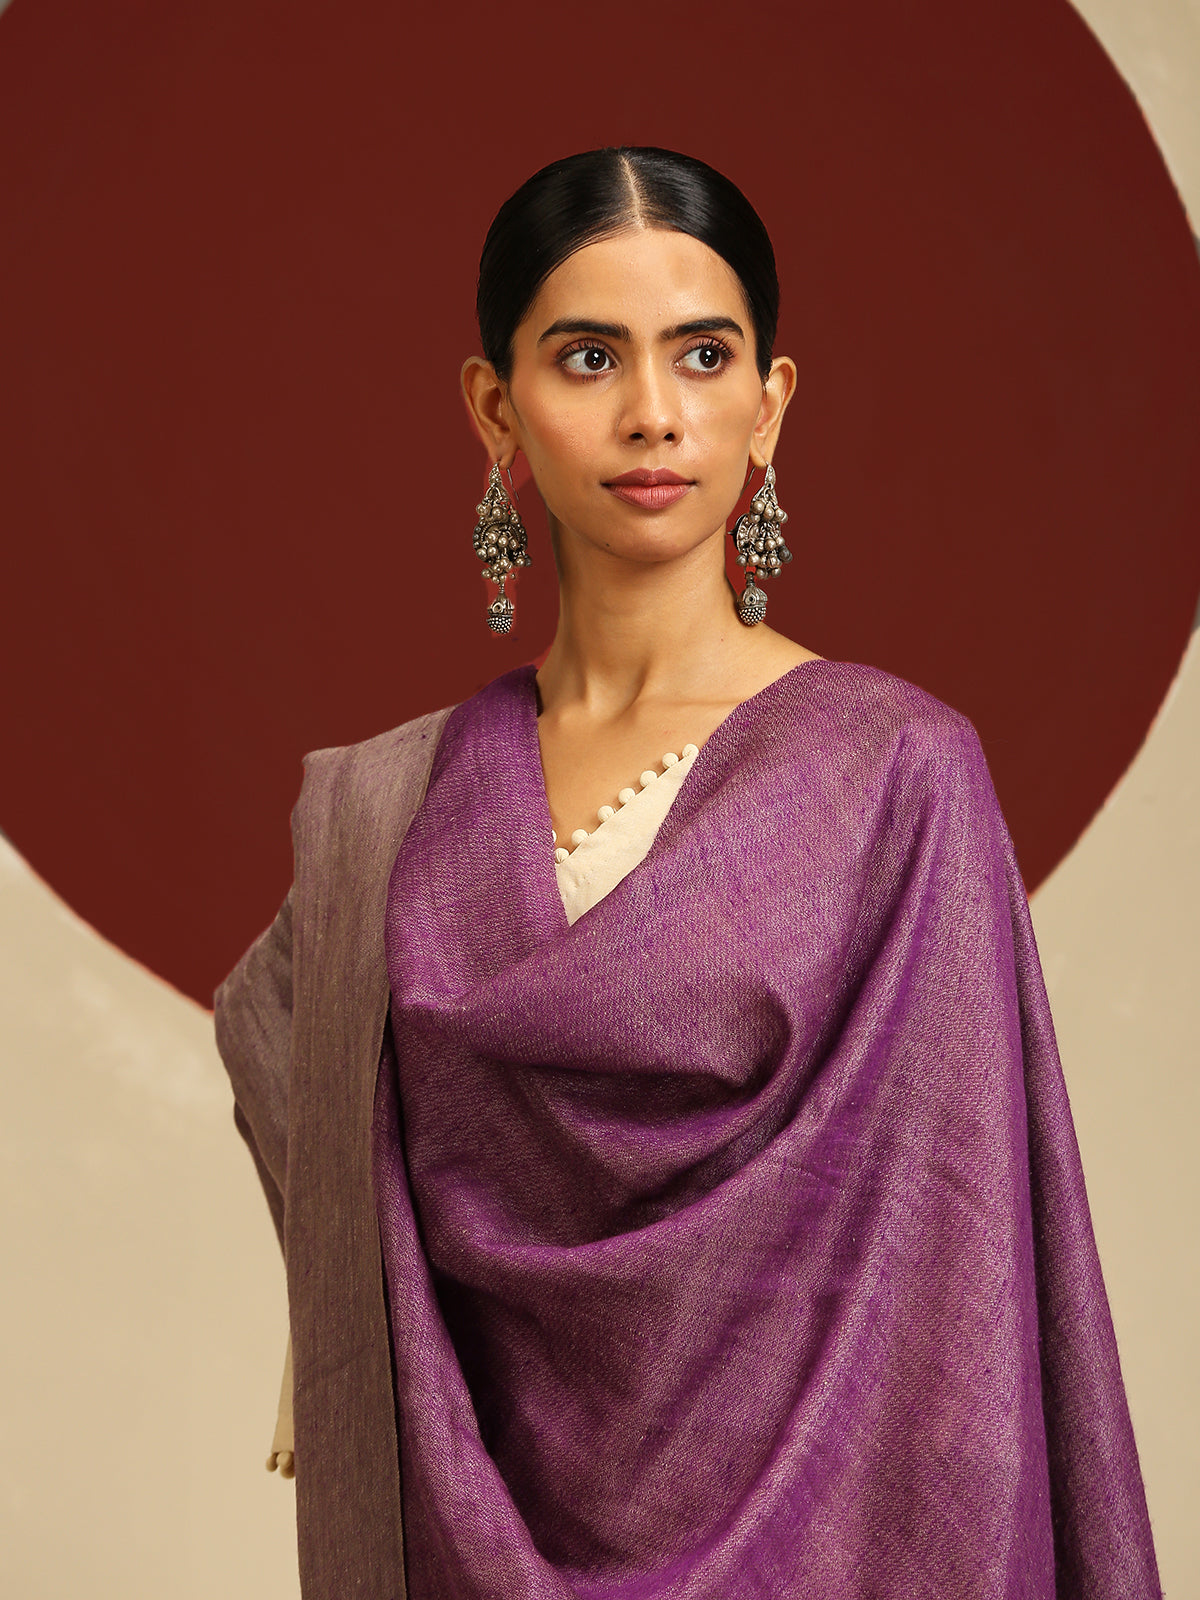 Model is wearing pashmina reversible shawl in purple with silver at the back.